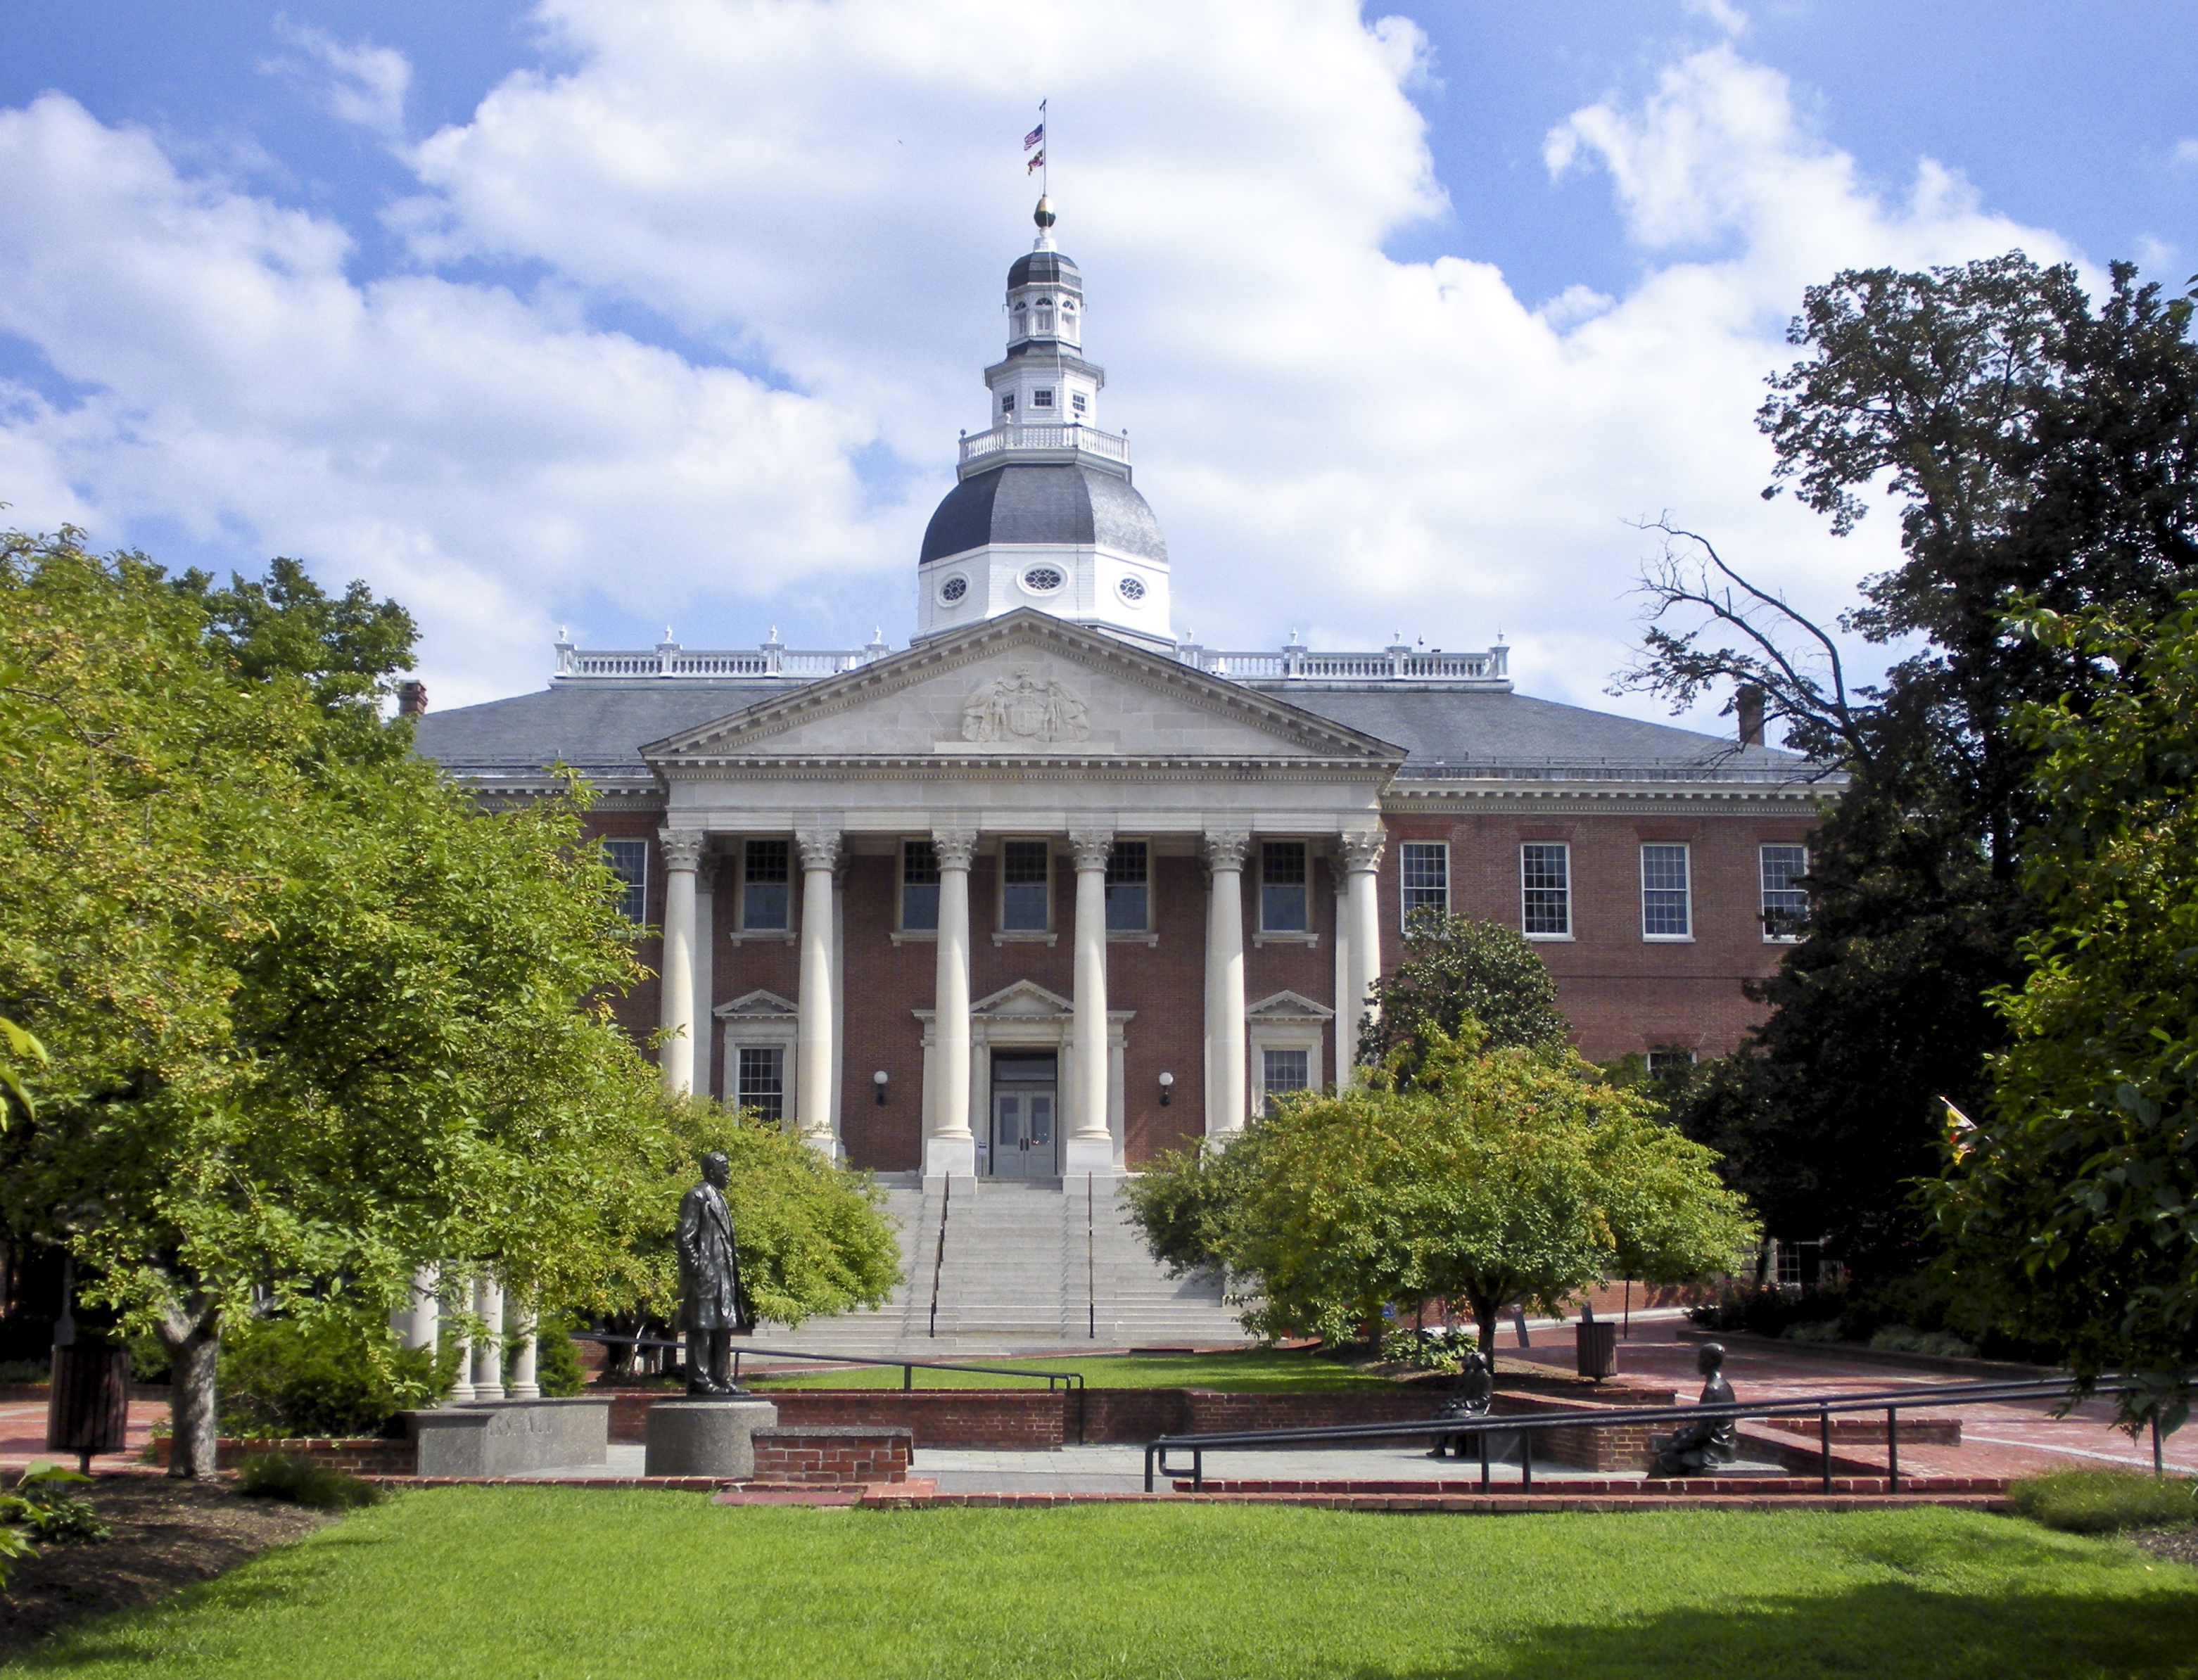 Maryland's State House building, a red brick building with a white dome, on a sunny day with blue skies.